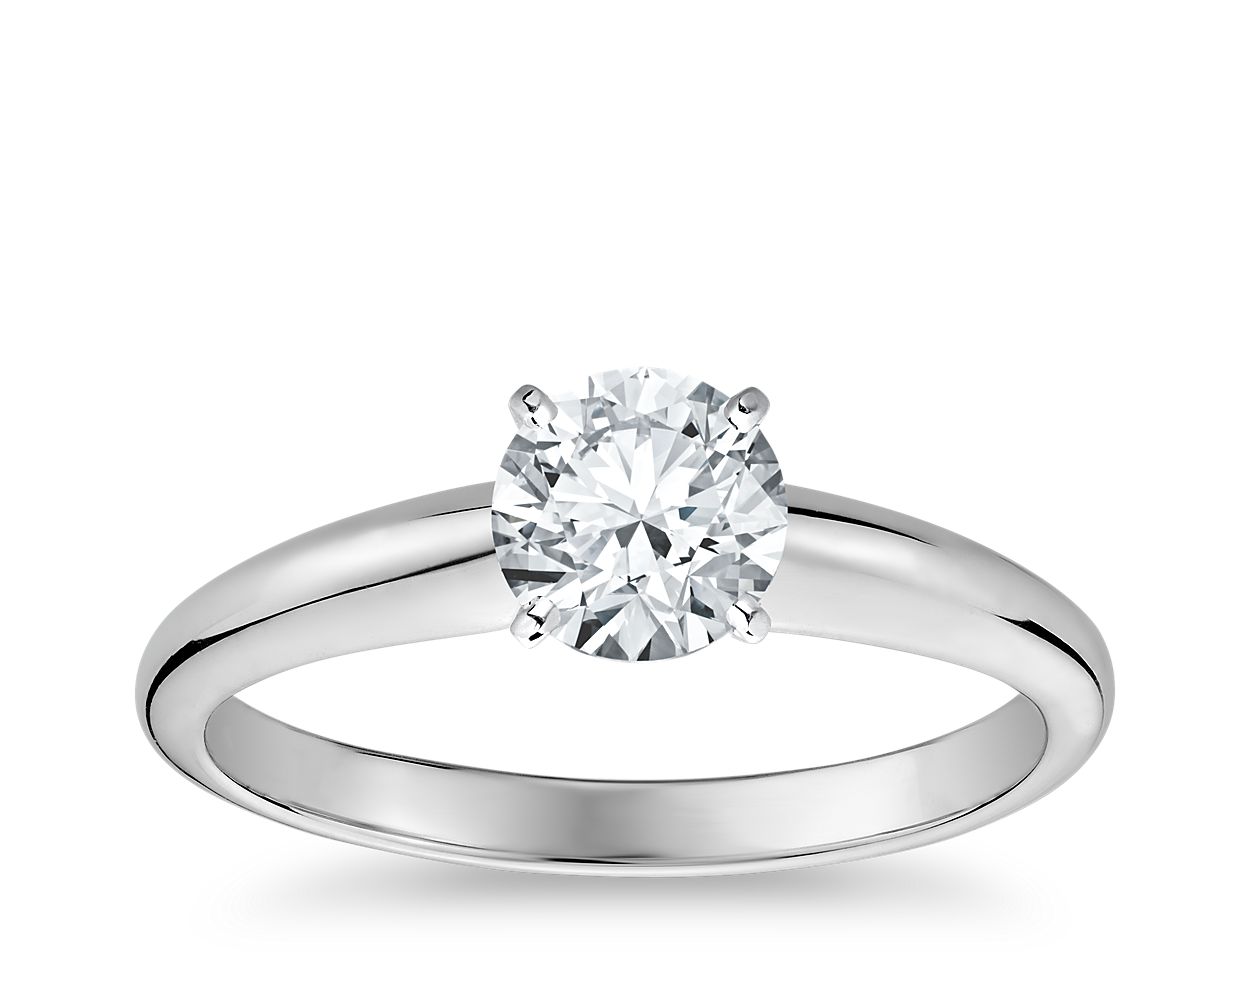 Amelia Prong Set Cathedral Solitaire Engagement Ring - Setting only |  Engagement ring settings only, Solitaire engagement ring settings,  Solitaire engagement ring cathedral